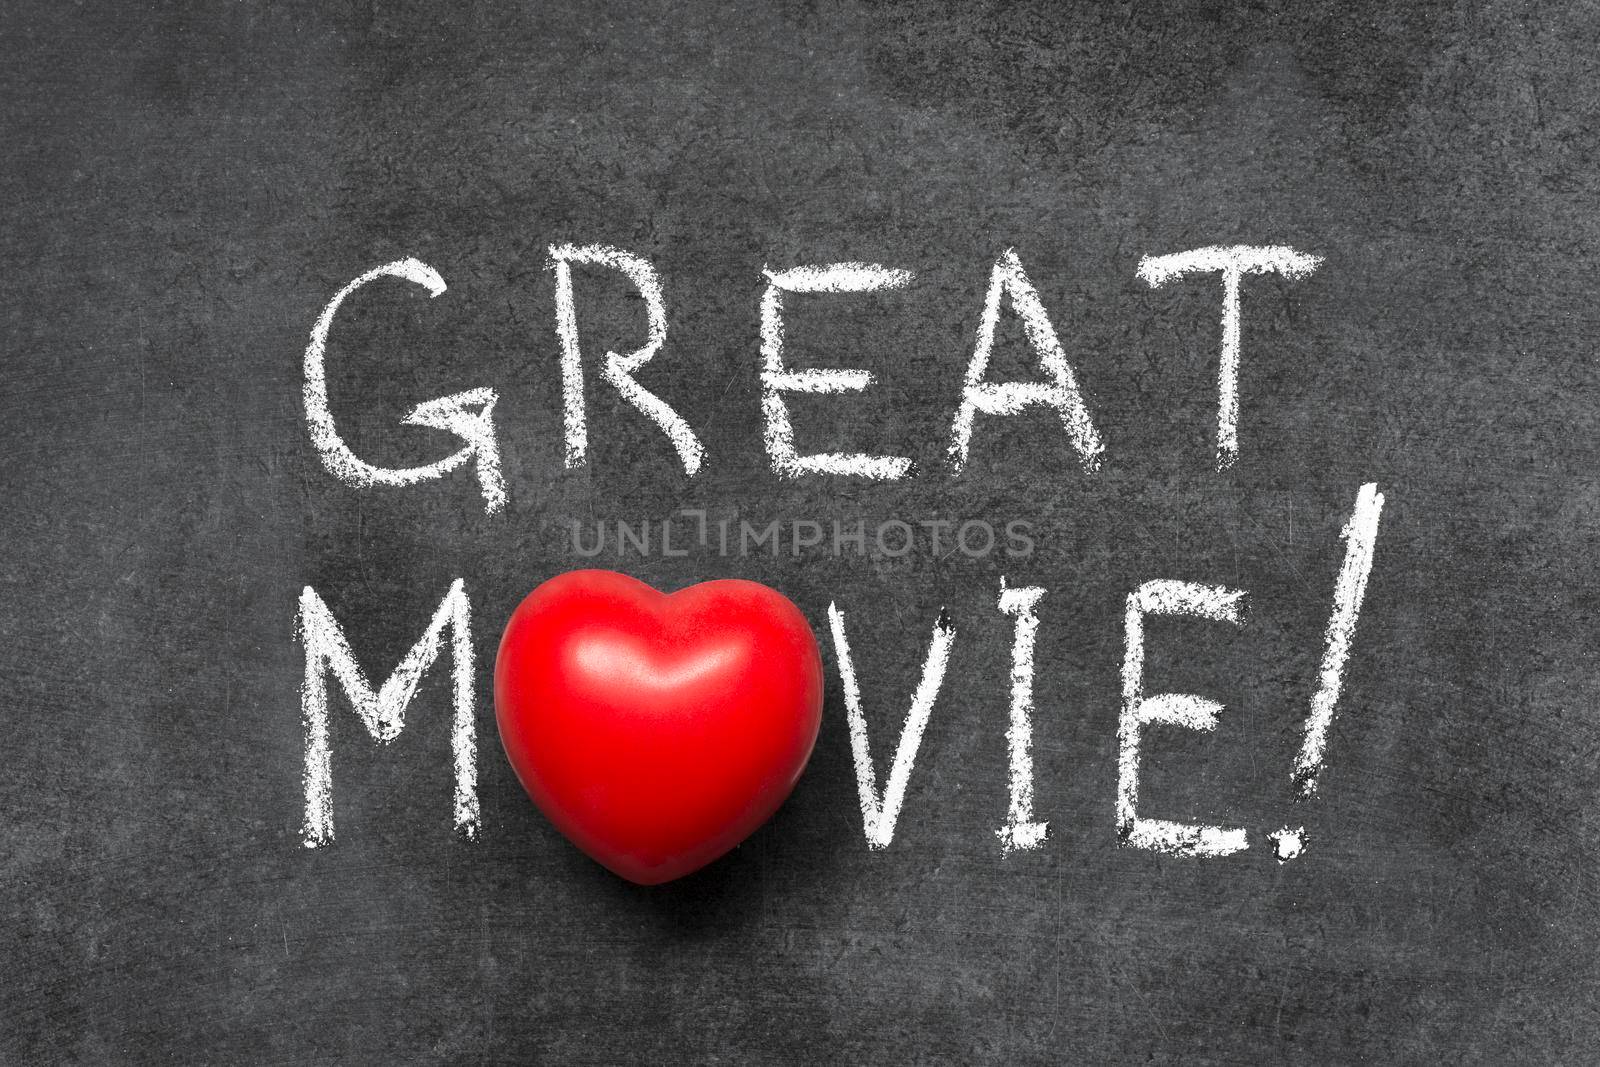 great movie exclamation handwritten on chalkboard with heart symbol instead of O